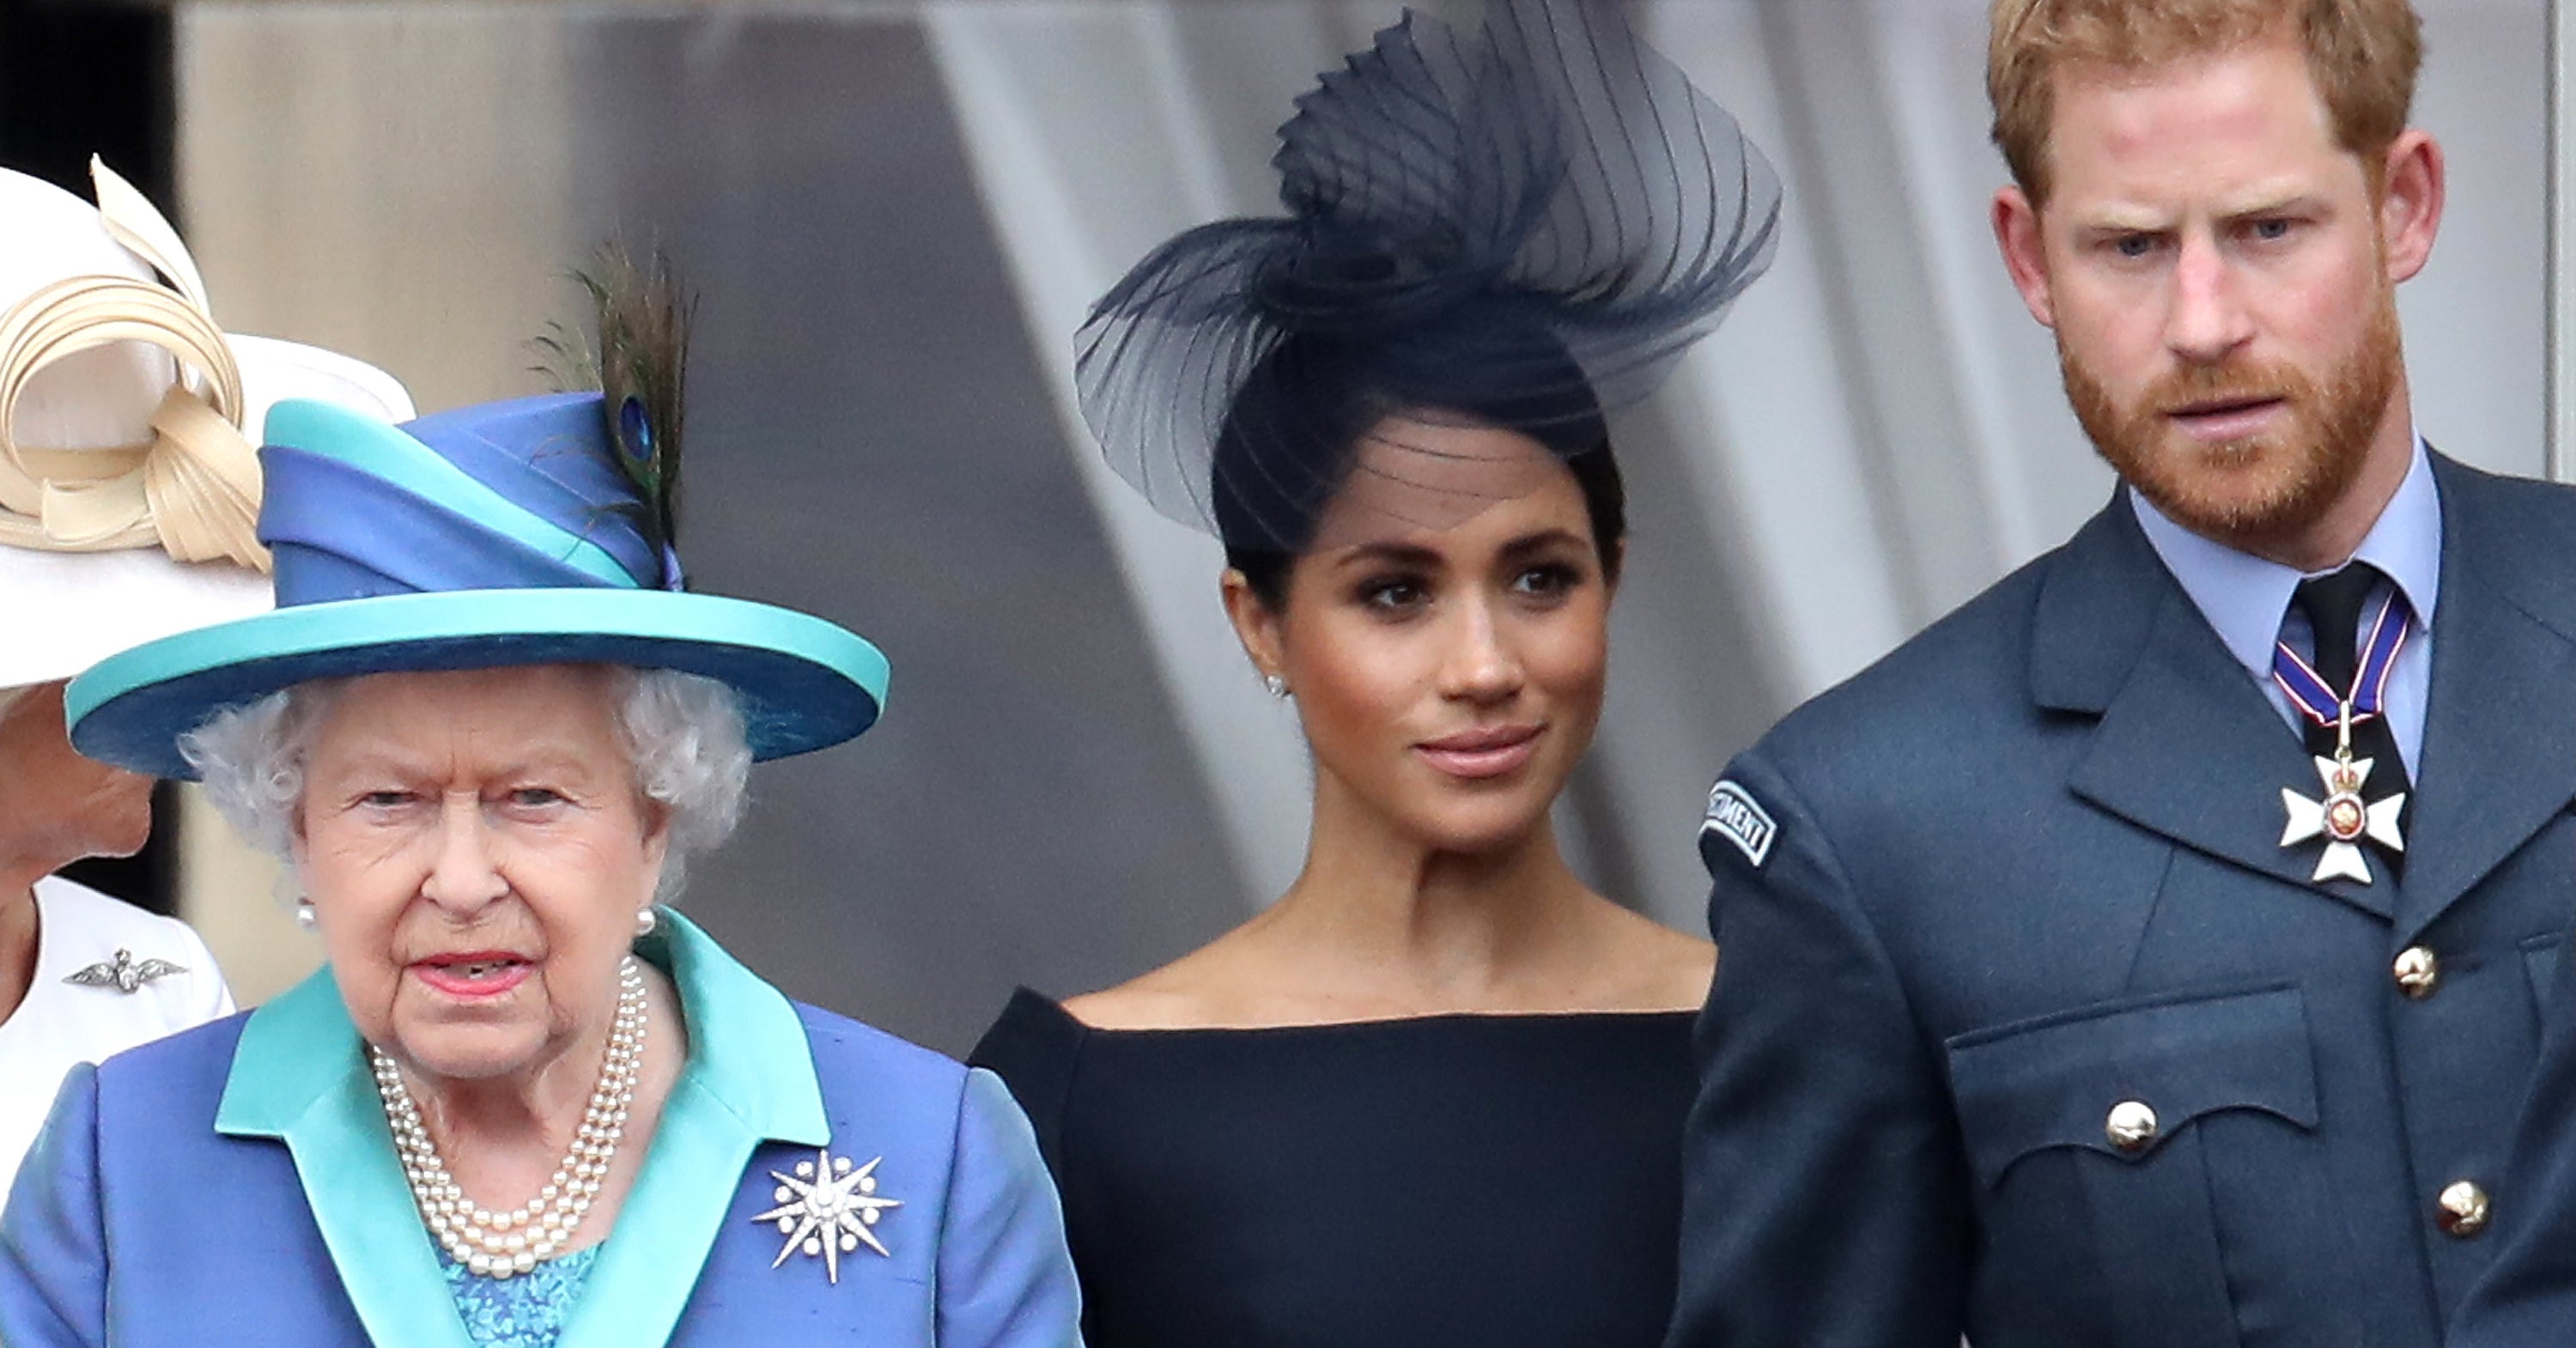 The Queen Says She's Concerned By Meghan And Harry's Racism Allegations